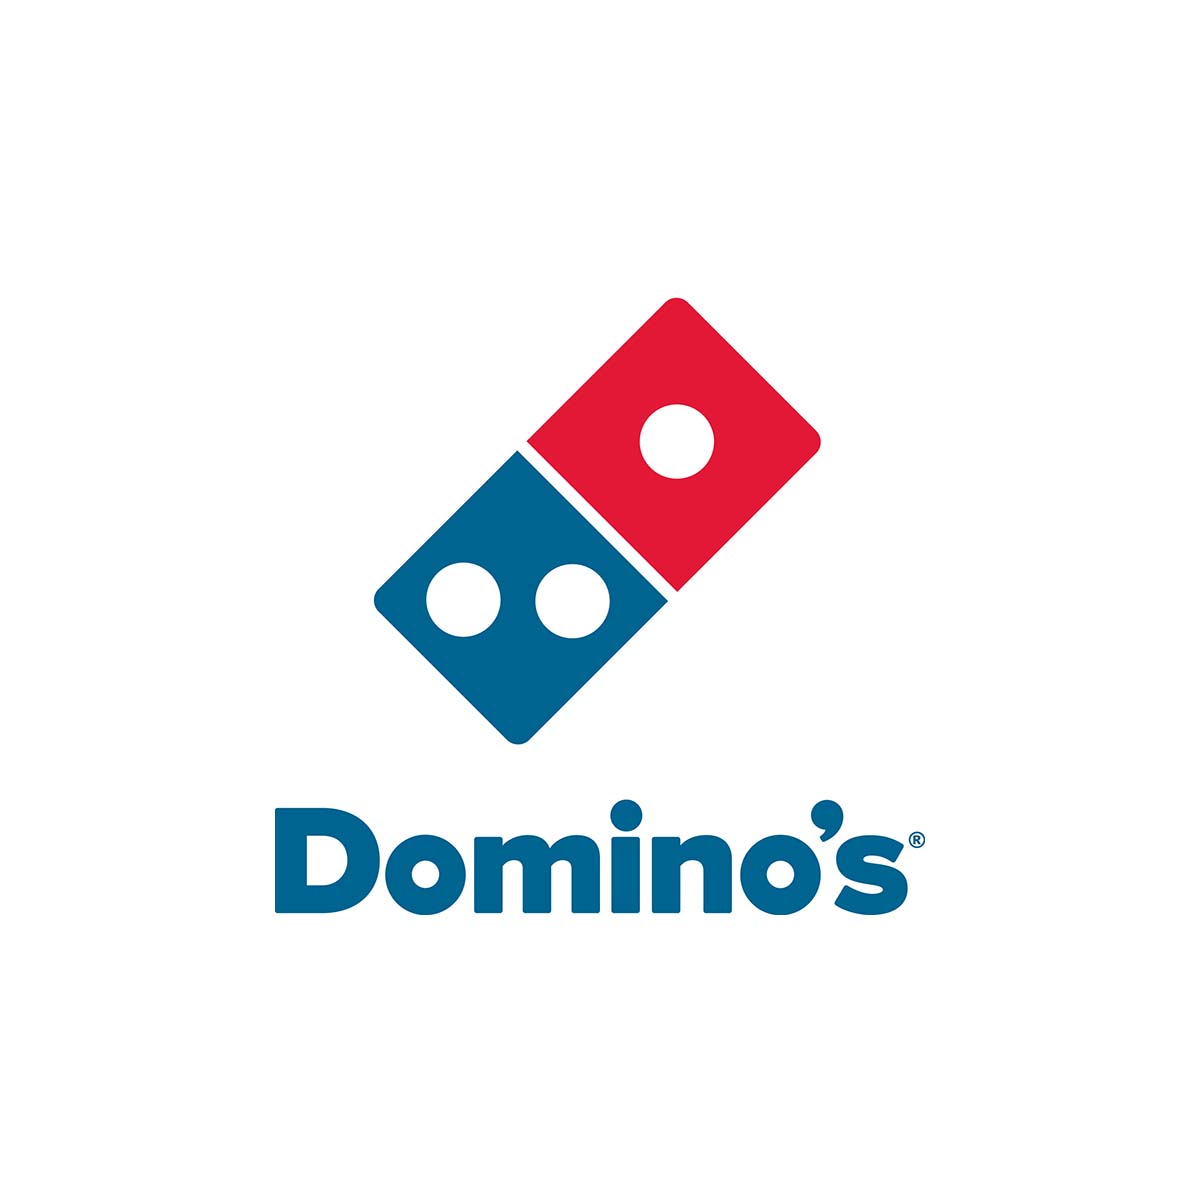 Google Places Nearby Logo - Pizza Delivery & Carryout, Pasta, Chicken & More | Domino's